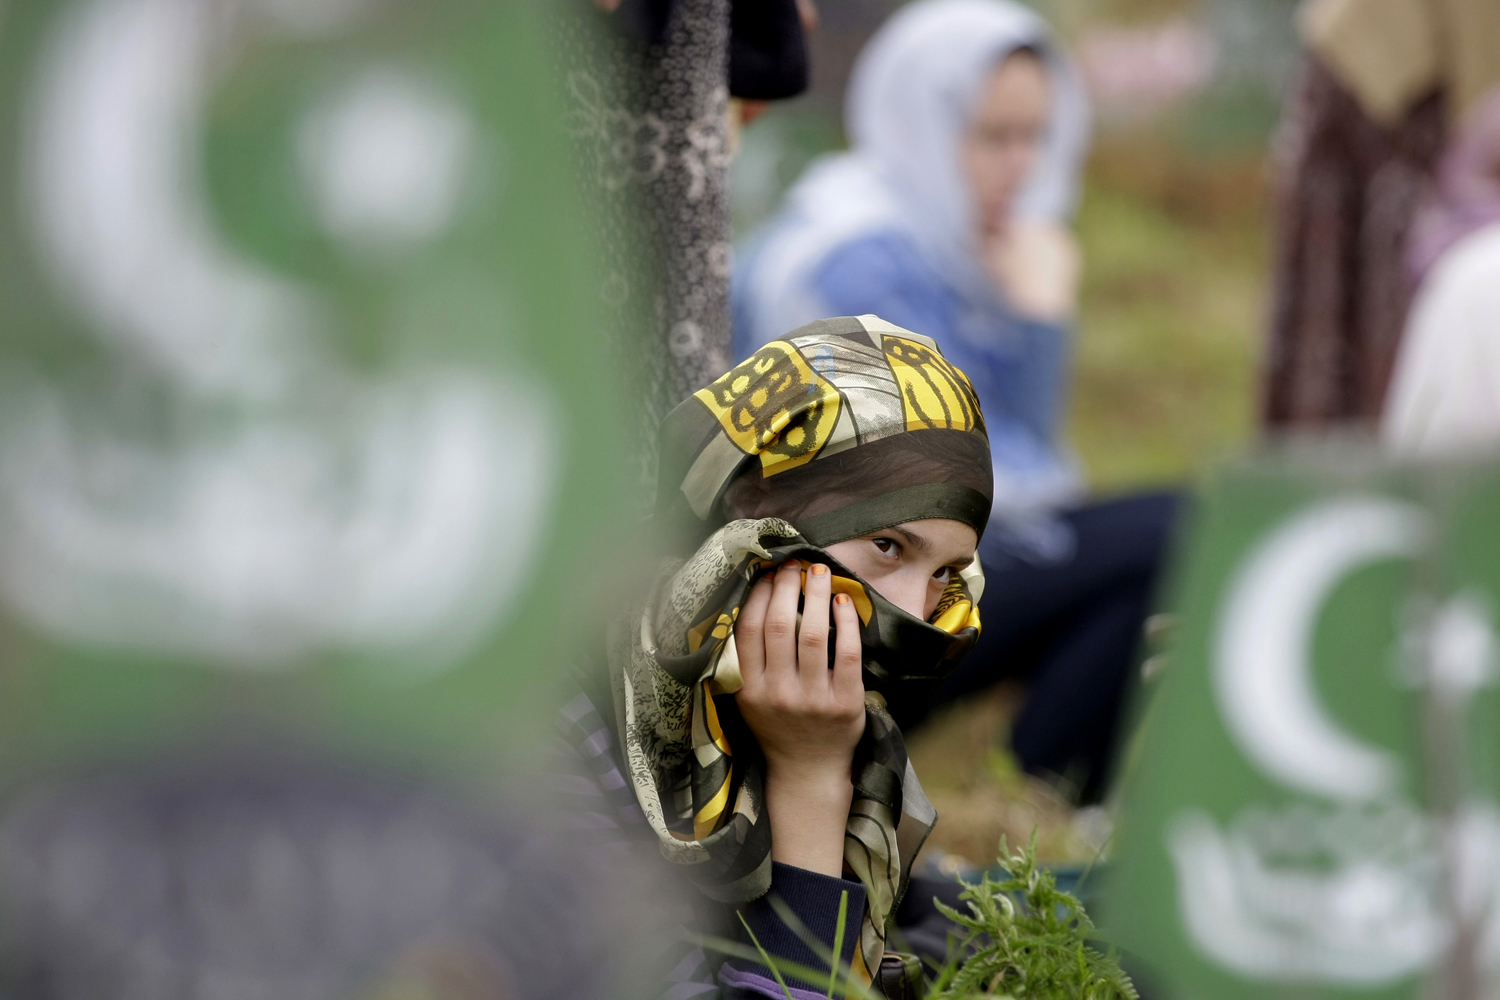 June 2, 2012. A Bosnian Muslim girl sits amidst wooden grave markers during a mass funeral in the eastern Bosnian town of Kalesija. Thousands have gathered in Kalesija to bury the 32 Muslim Bosniaks, killed at the start of the country's 1992-95 war, whose remains were discovered in numerous mass graves and identified through DNA analysis.